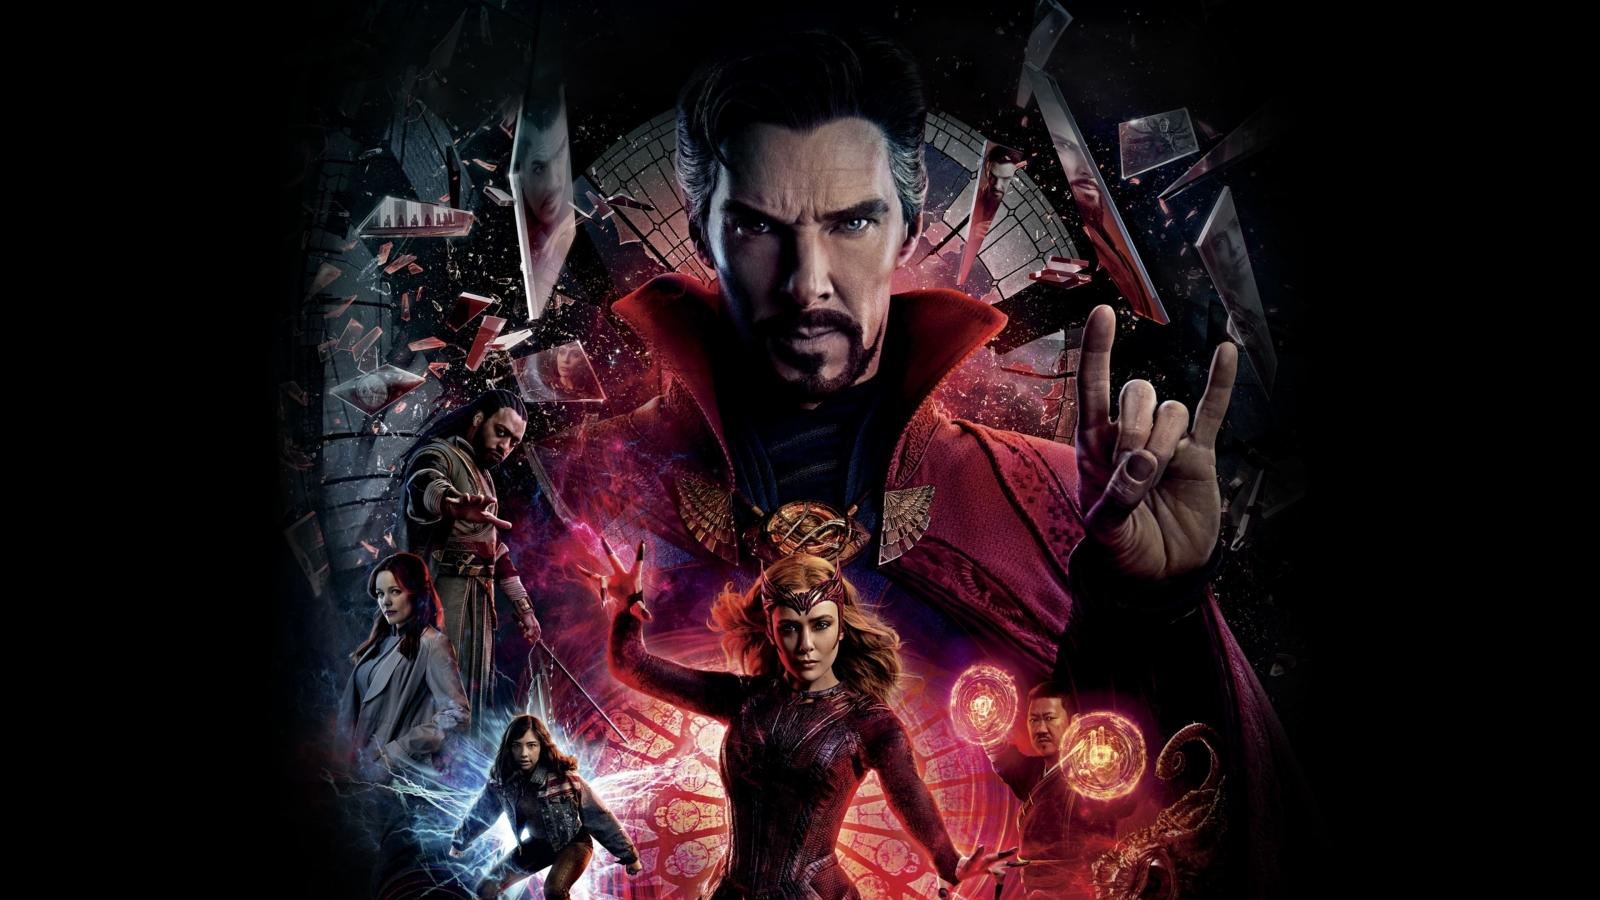 A poster of Doctor Strange which features every character looking ominous